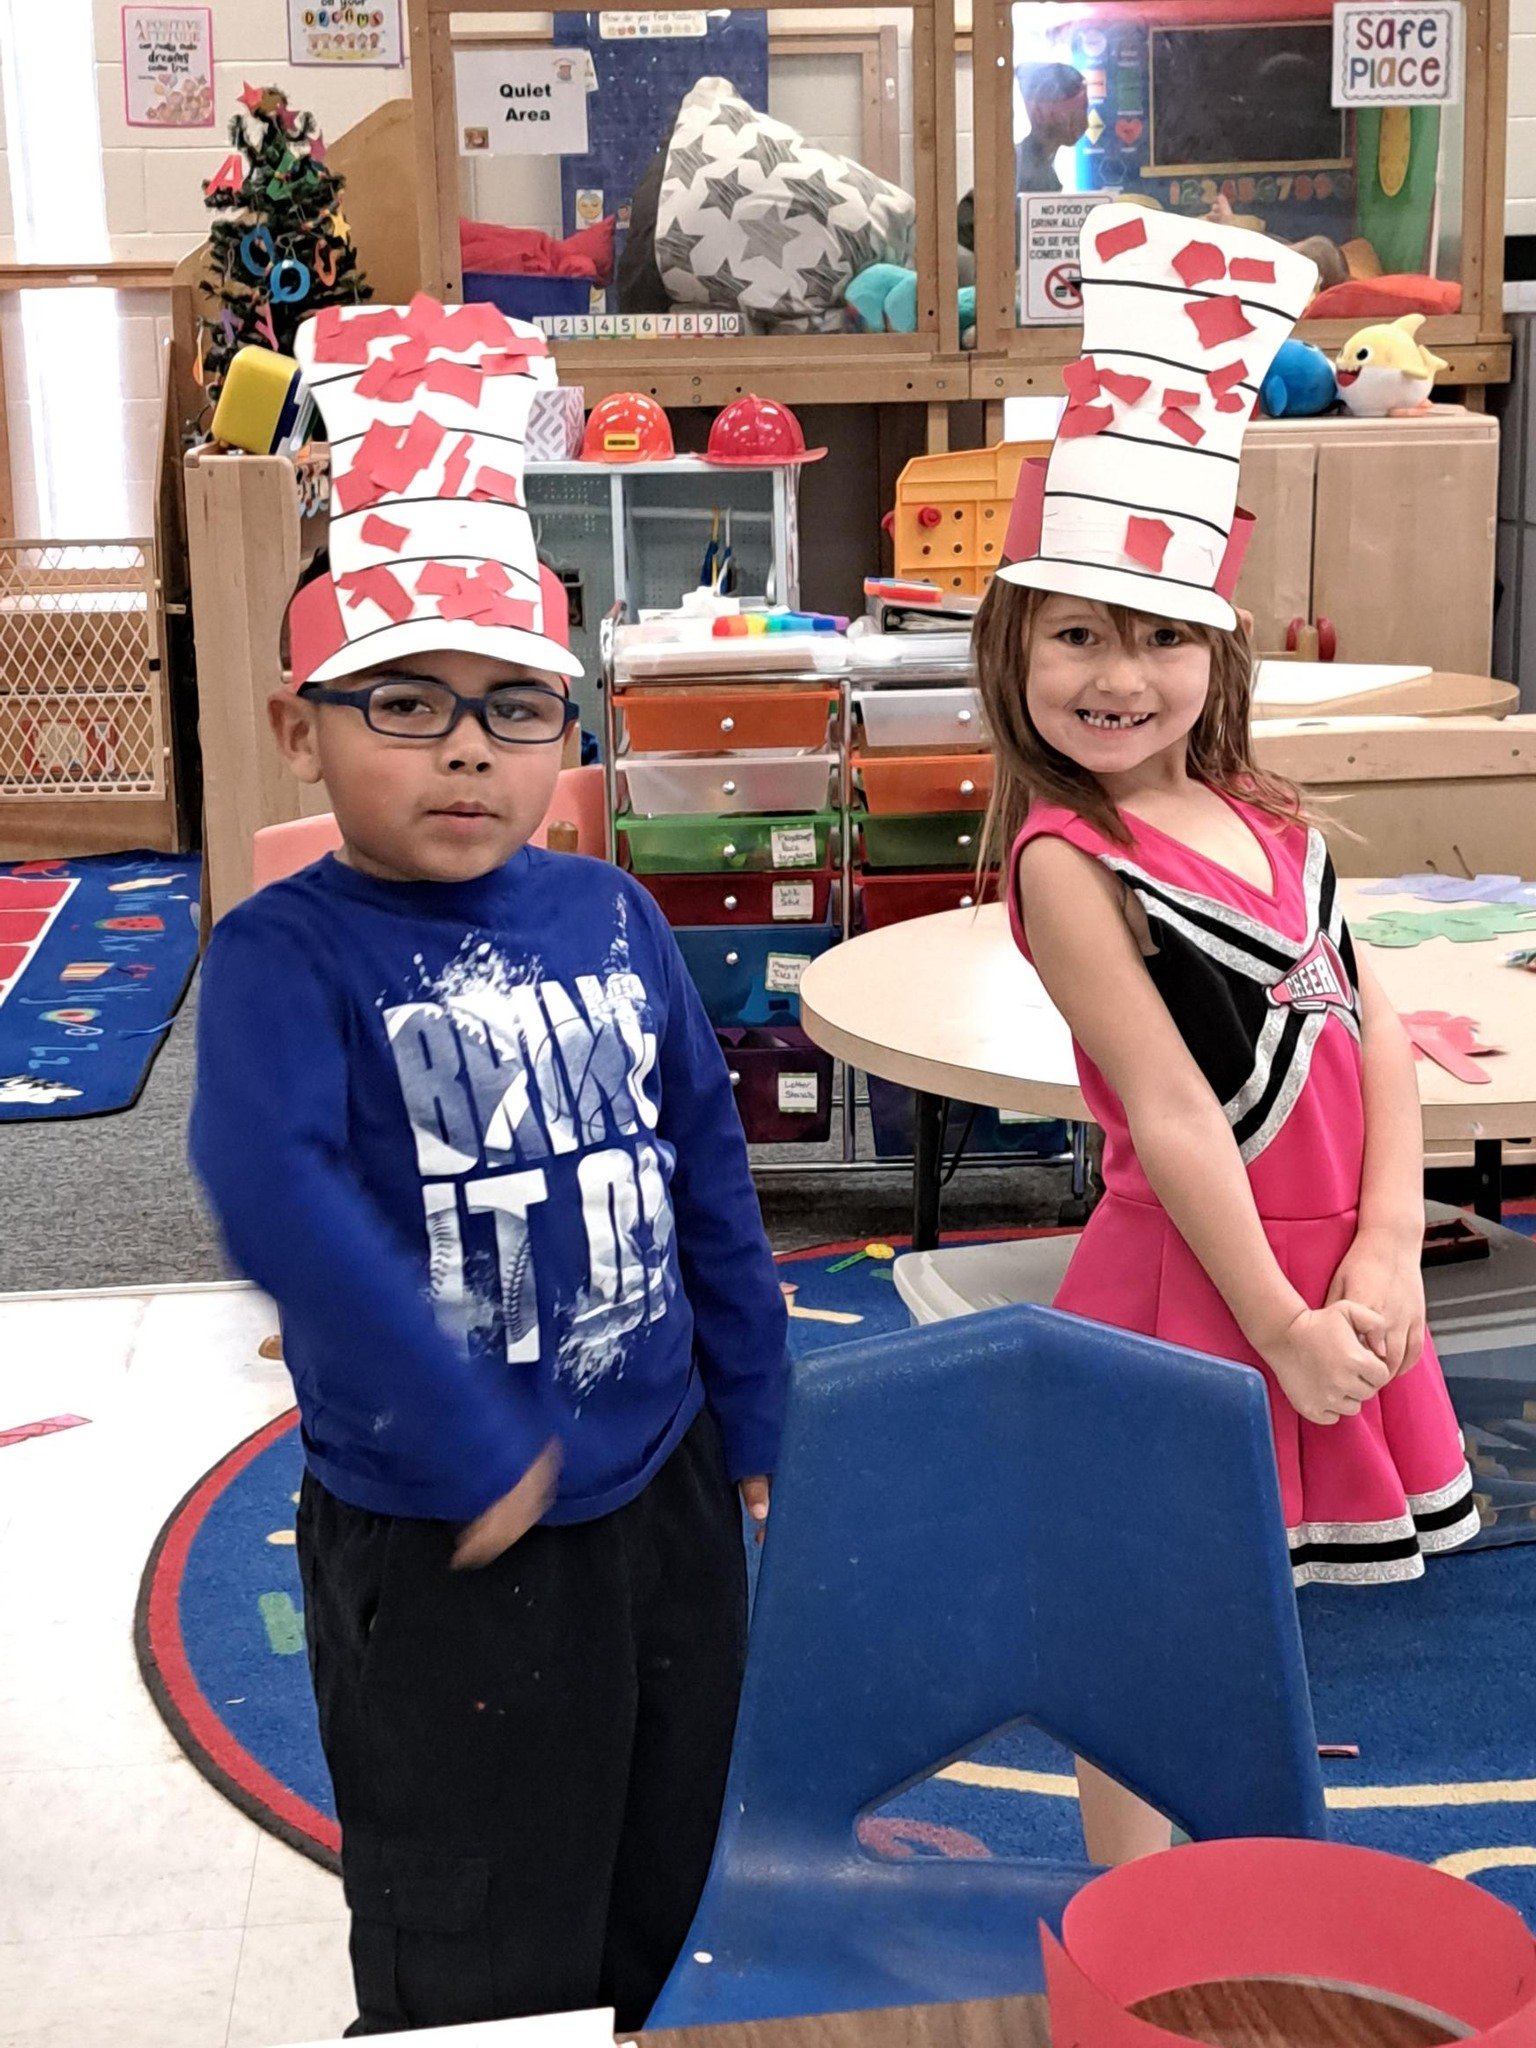  Happy Birthday Dr. Seuss! Delicious Seuss inspired cookies, wearing crazy hats and making Cat in the Hat hats made our day super special in Lincoln PreK! 